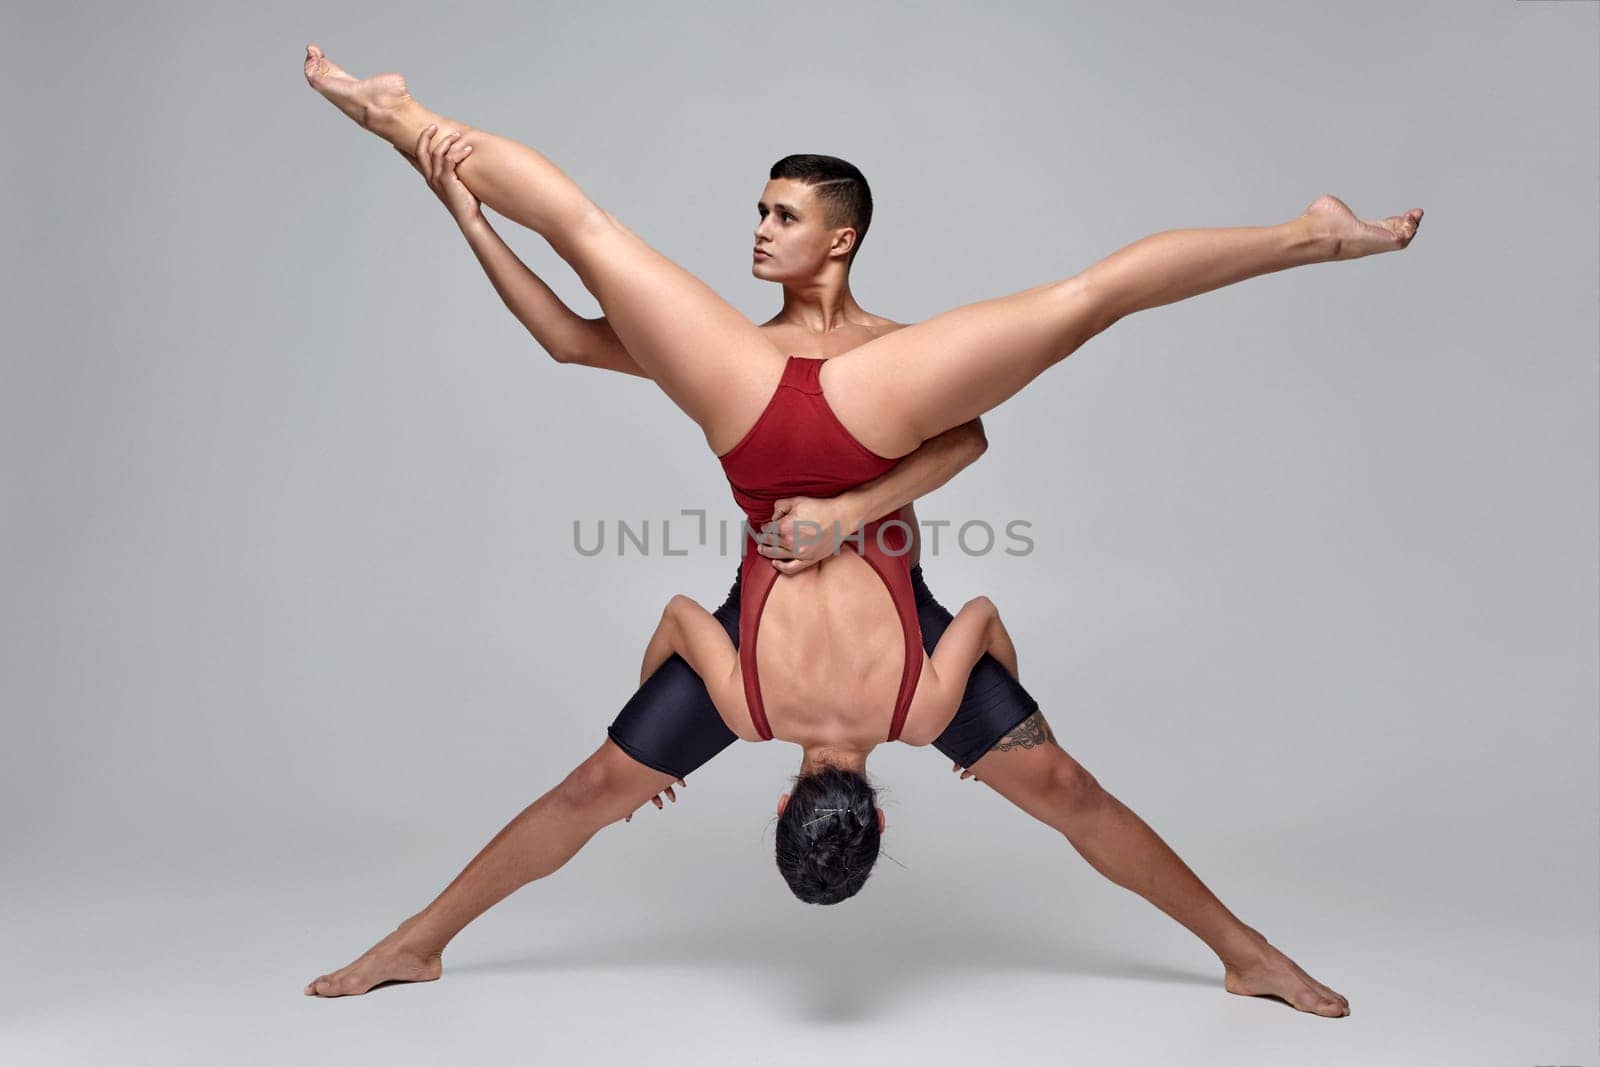 The pair of a modern ballet dancers are posing against a gray studio background. Strong man in black shorts and tiny woman in a red swimwear are dancing together. Ballet and contemporary choreography concept. Art photo.